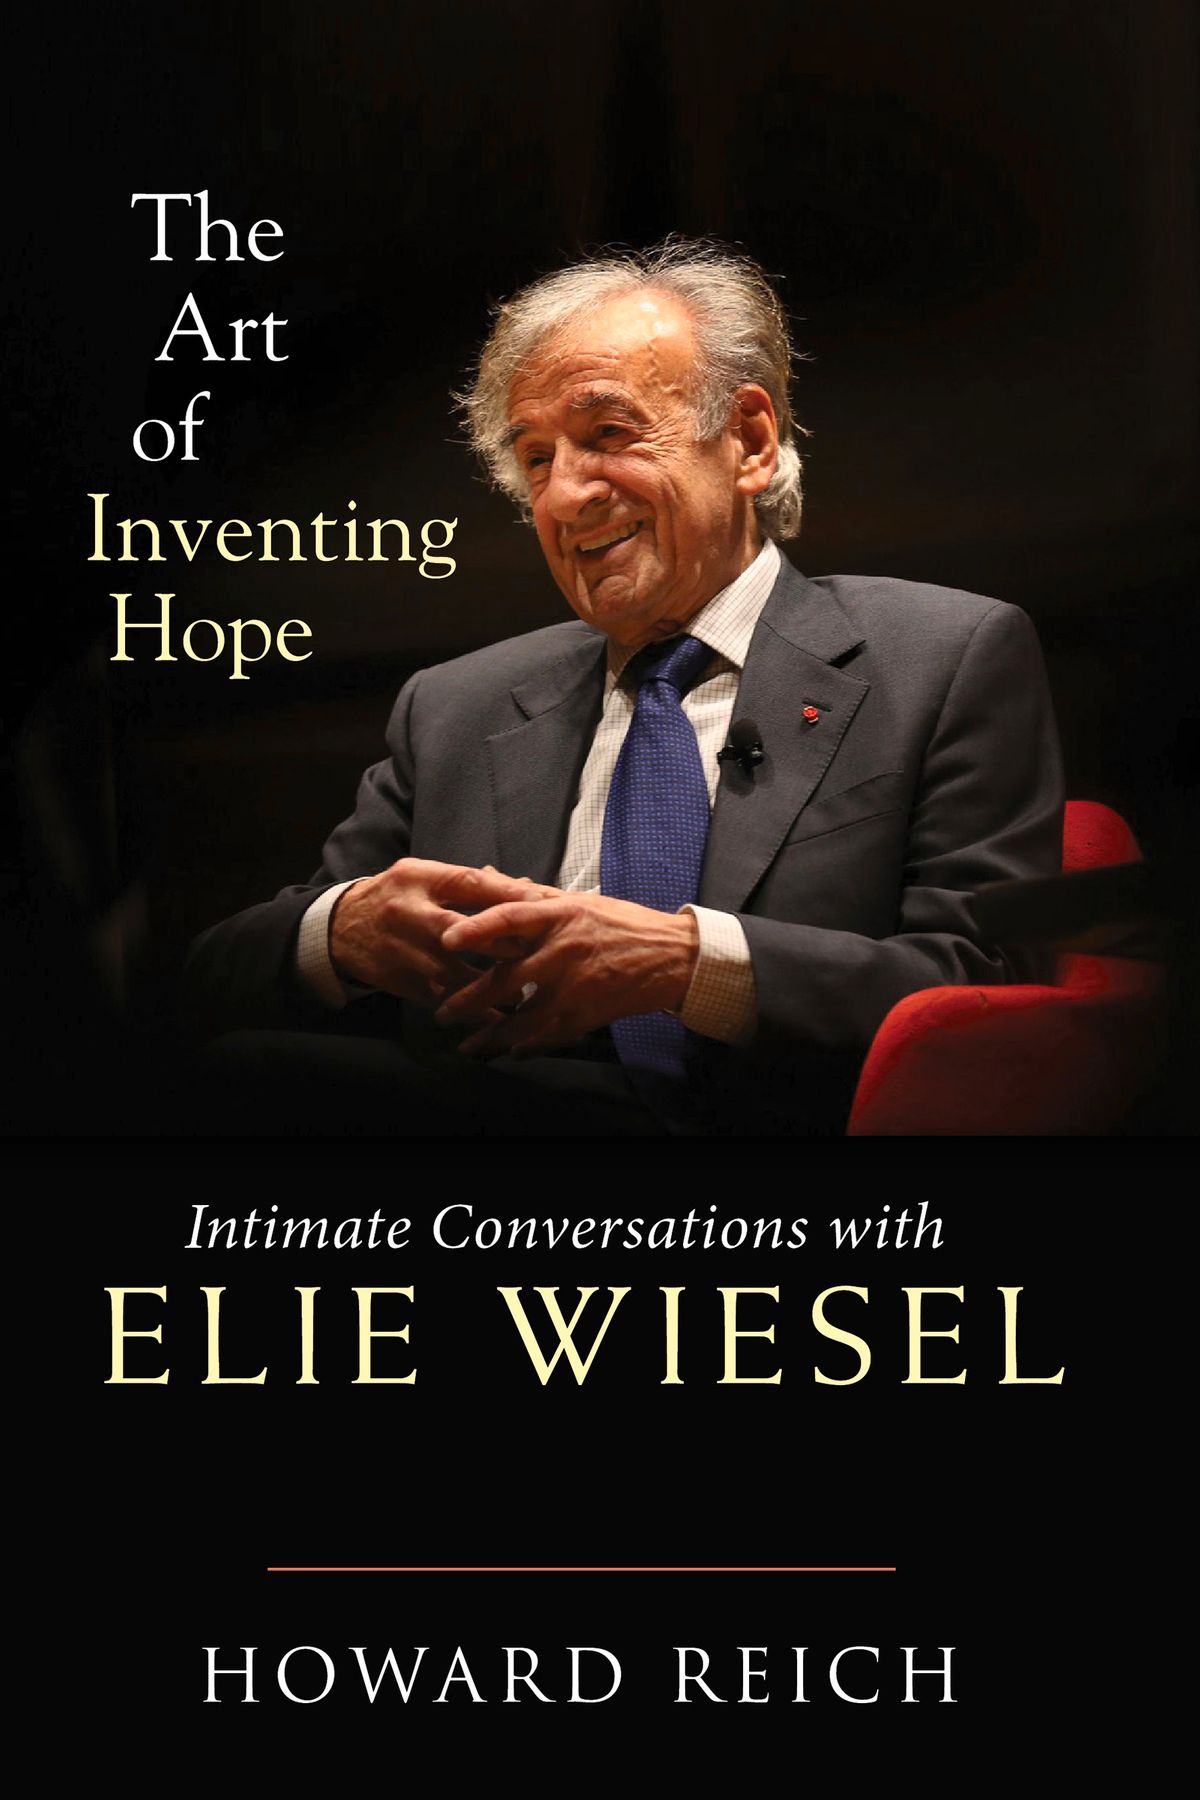 The Art of Inventing Hope: Intimate Conversations with Elie Wiesel